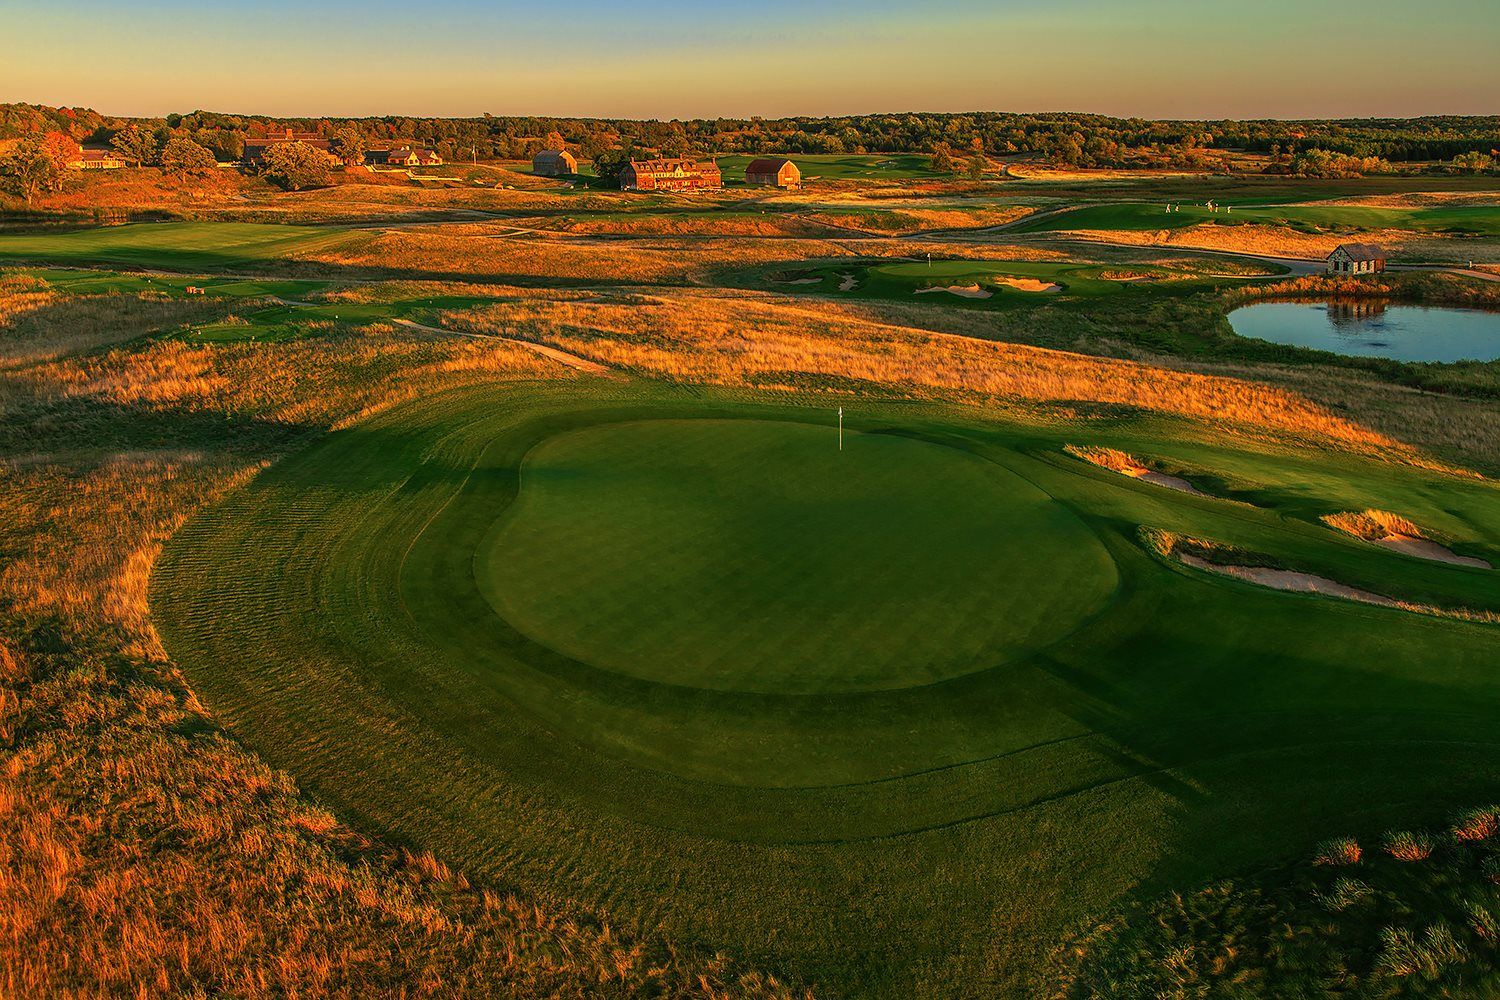 This years golf US Open will be held at Erin Hills in Wisconsin IrishCentral